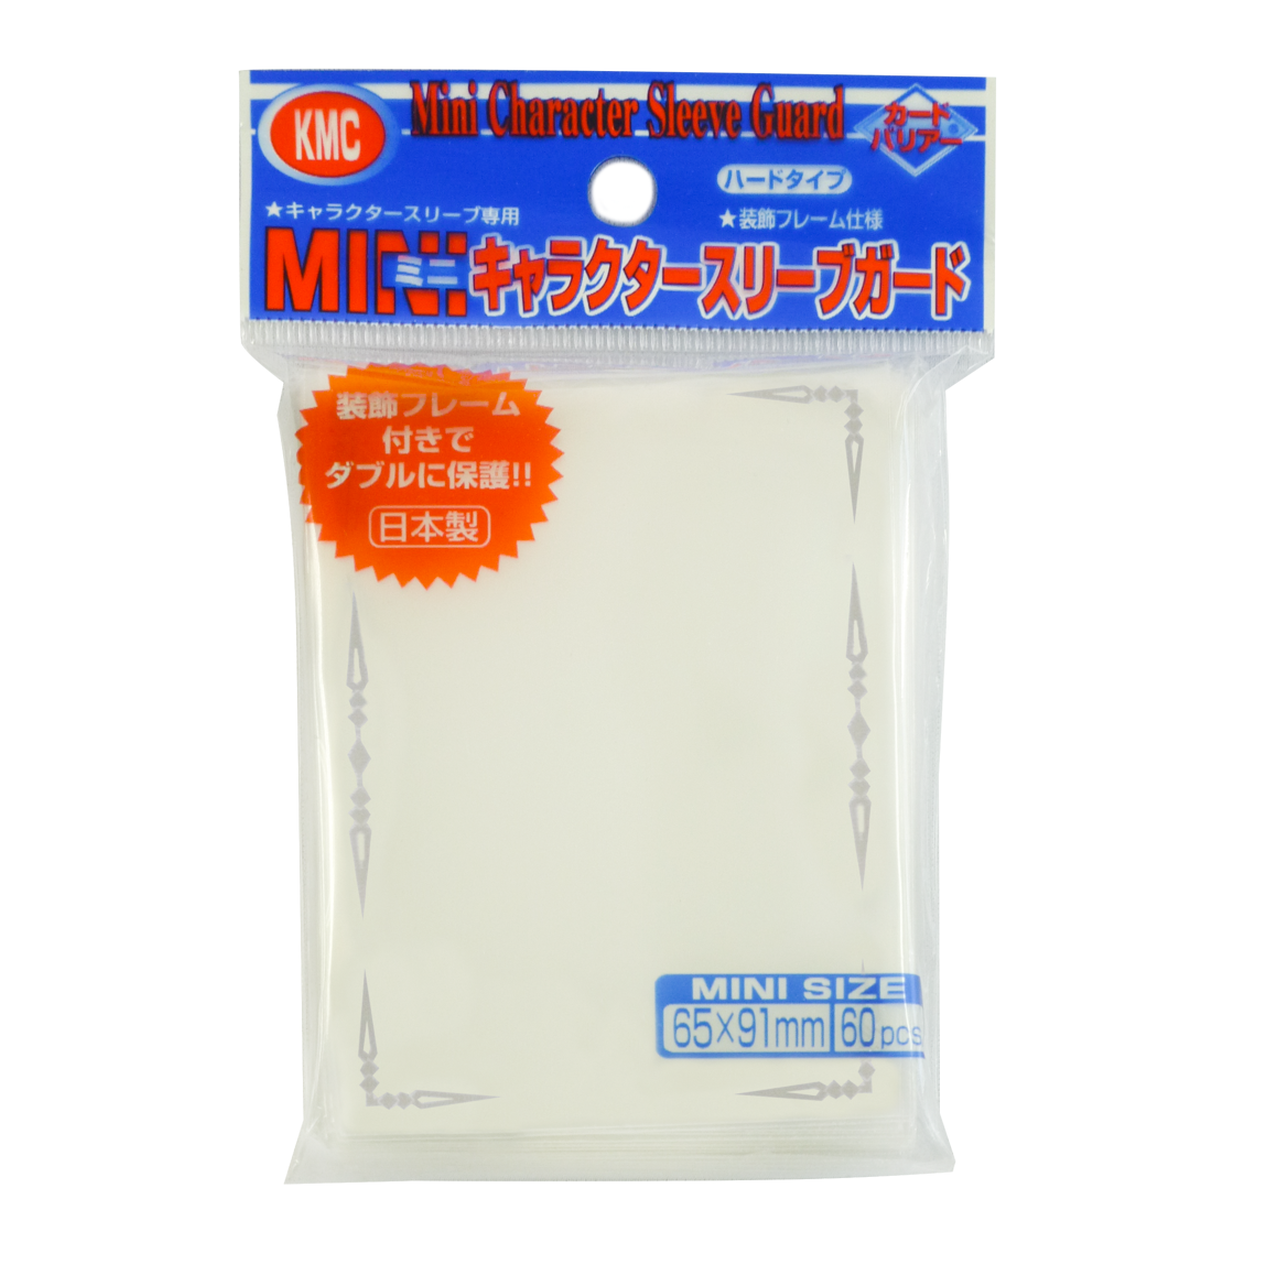 KMC Sleeve Character Sleeve Guard Mini Size 60pcs (Silver Frame)-KMC-Ace Cards & Collectibles